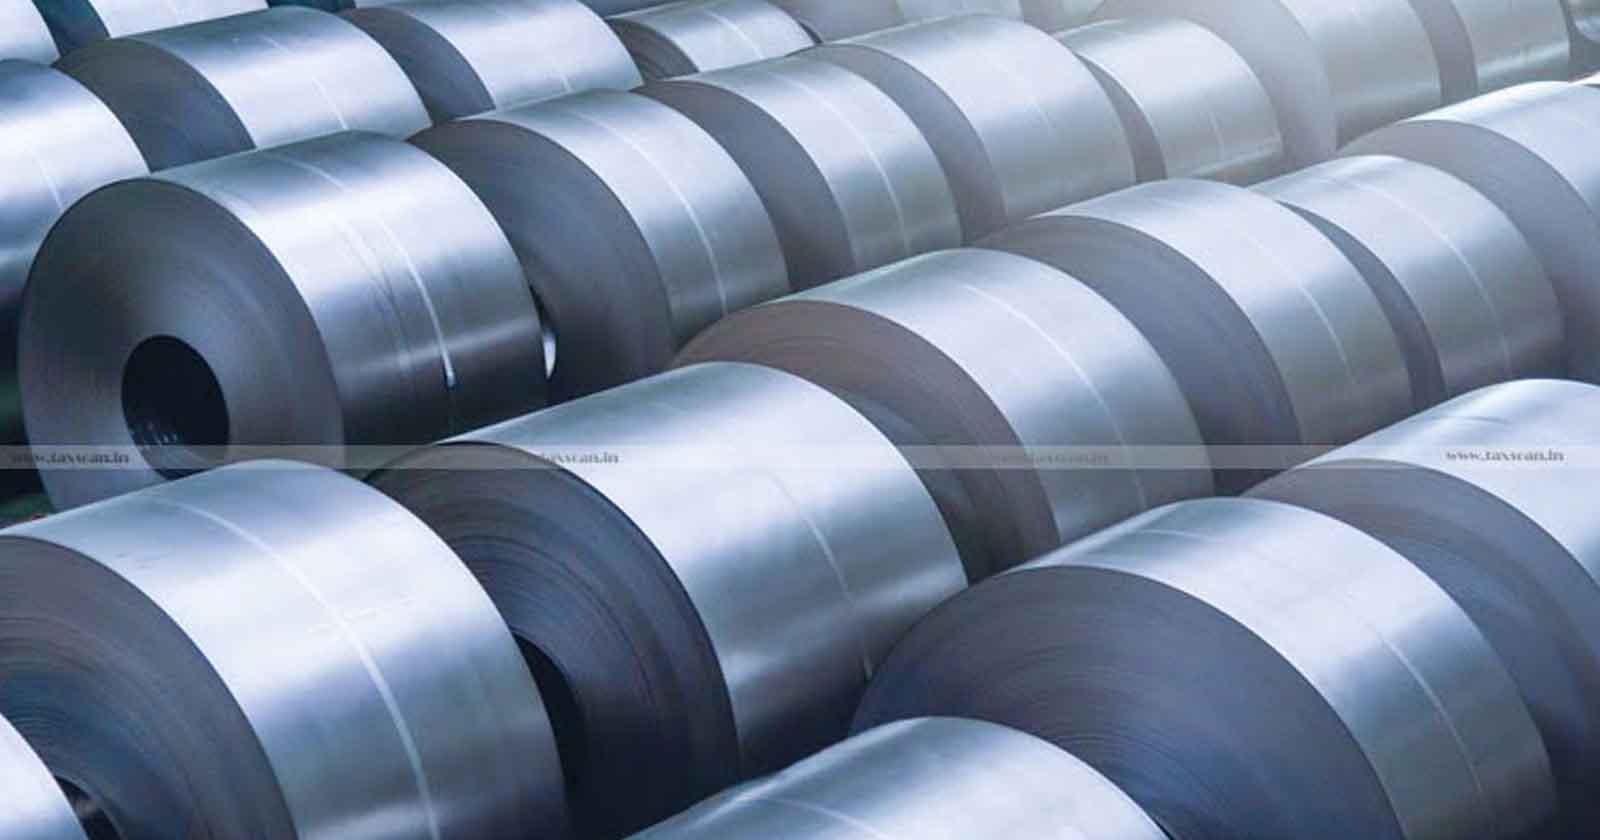 Anti-dumping Duty - Anti-dumping Duty Leviable - Import of Cold rolled Stainless steel Coils - Cold rolled Stainless steel Coils - Stainless steel Coils - Mill Edged coils - CESTAT - TAXSCAN